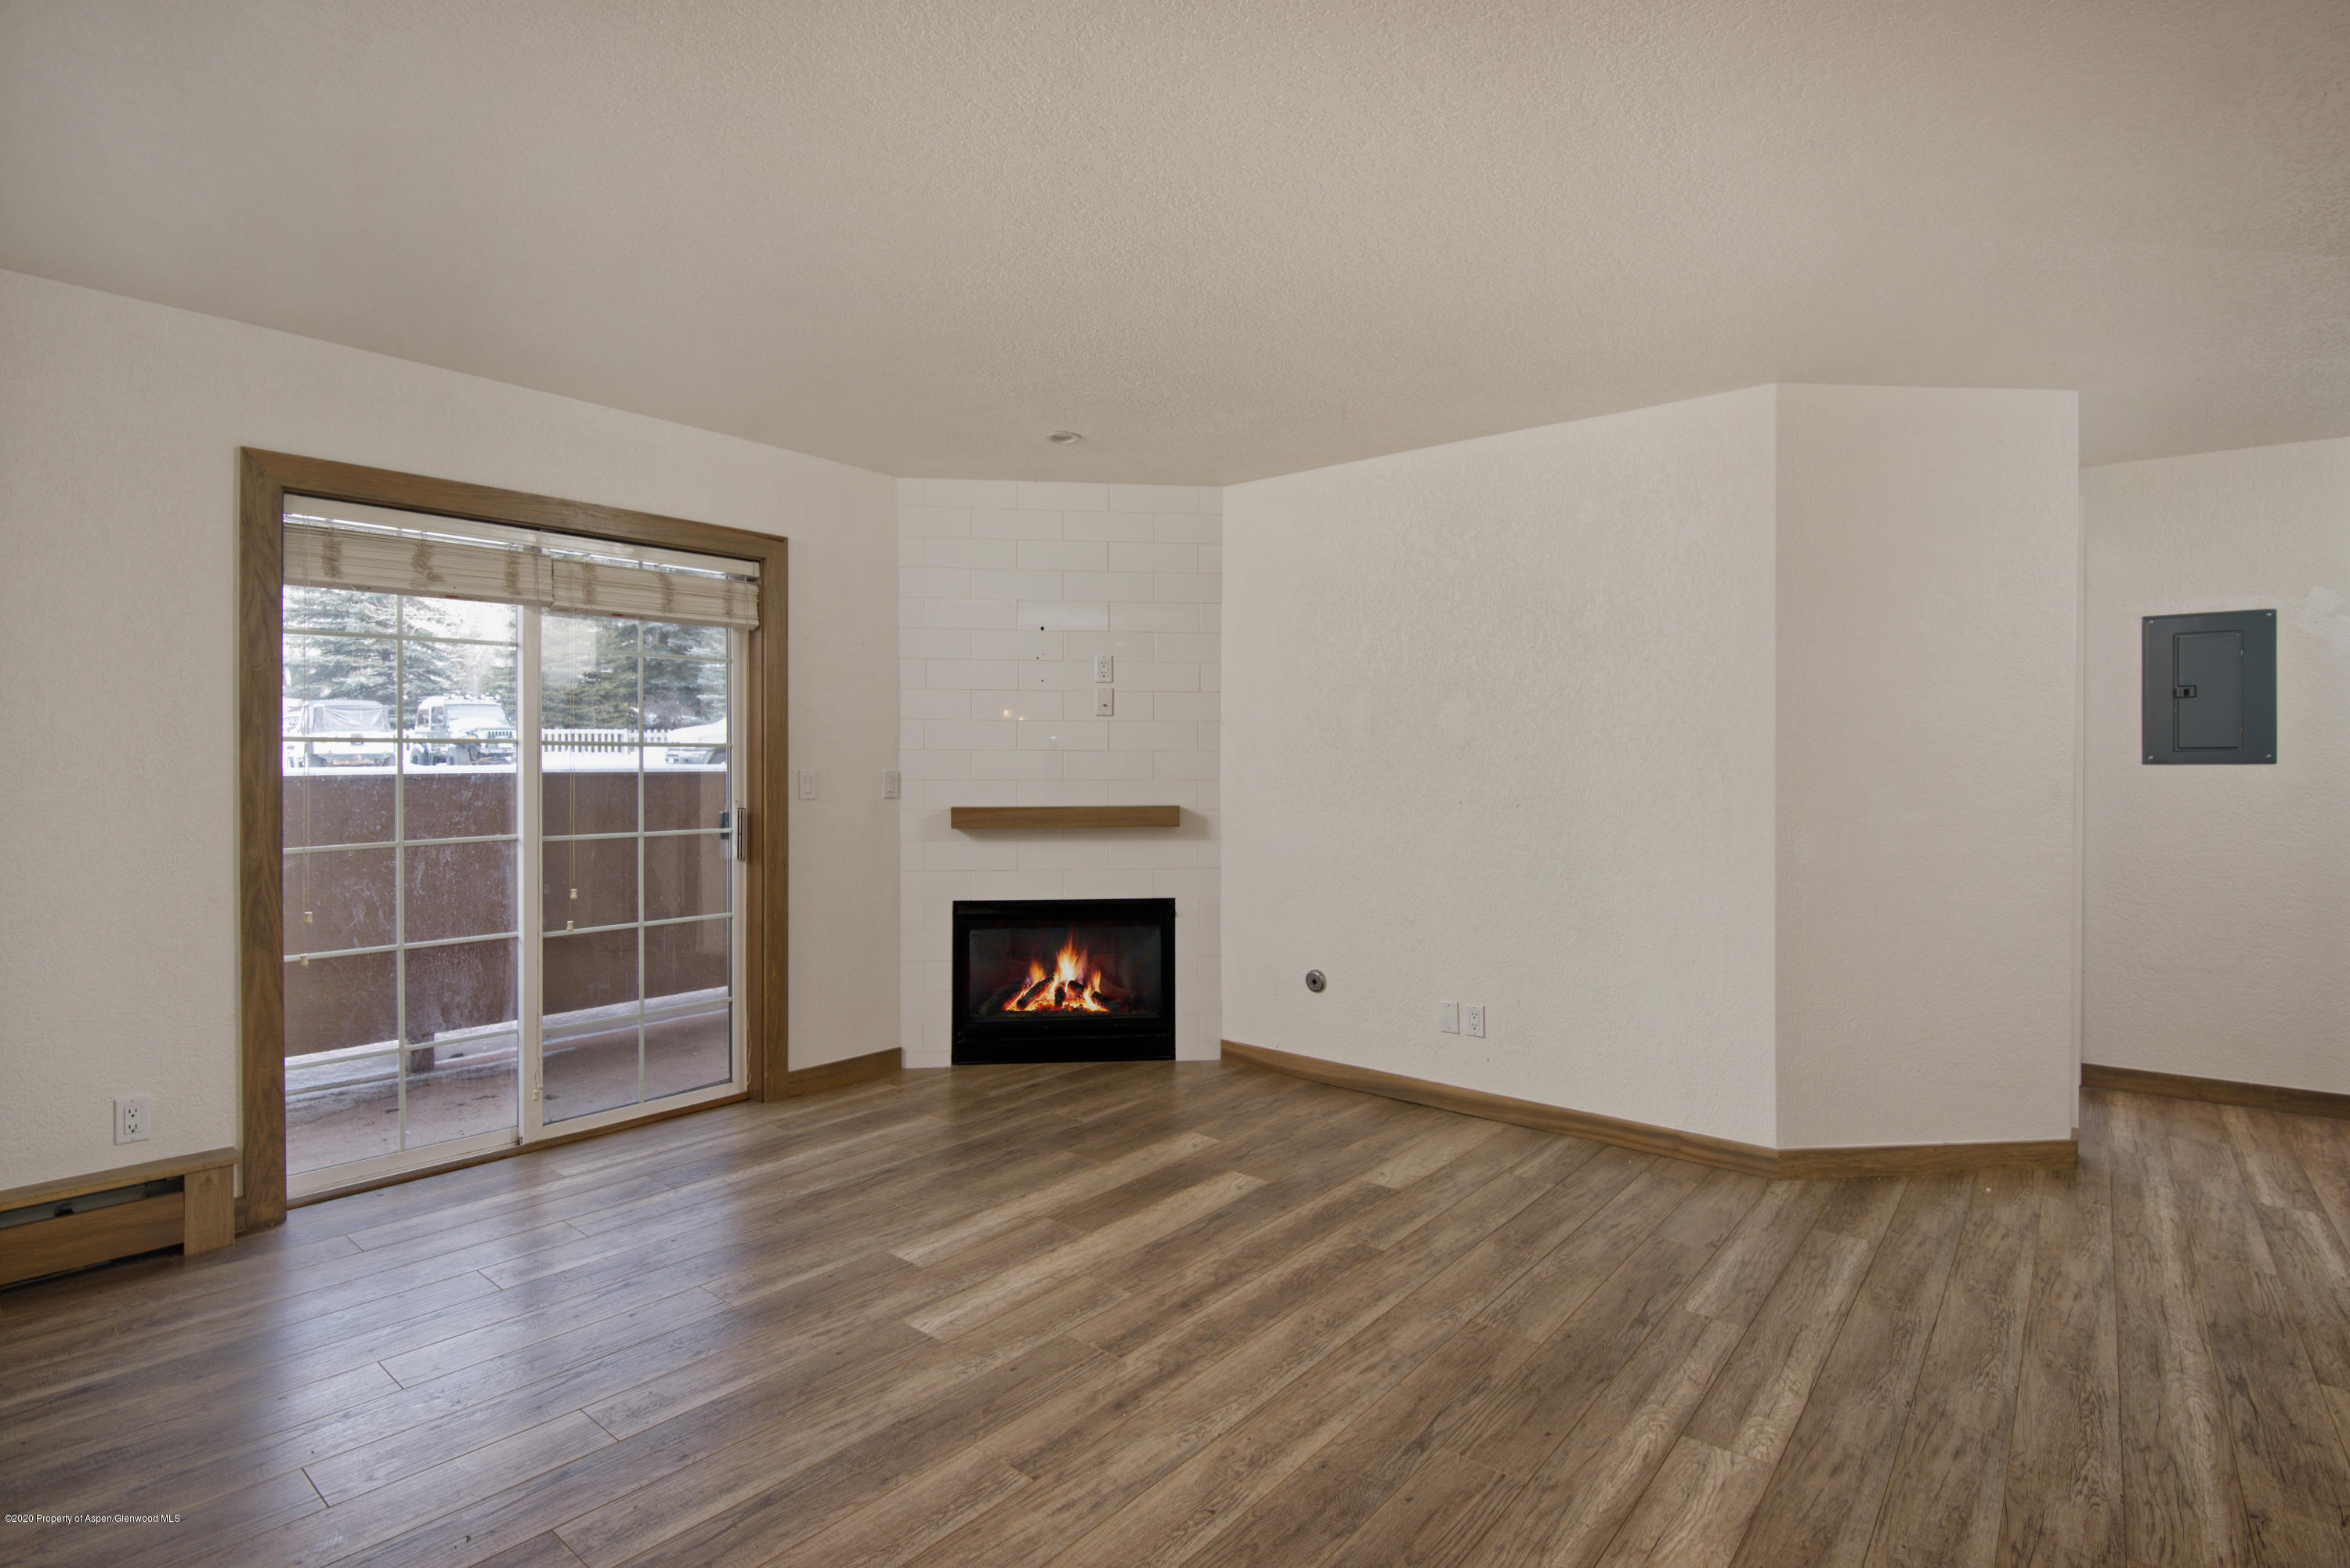 an empty room with wooden floor a fireplace and windows